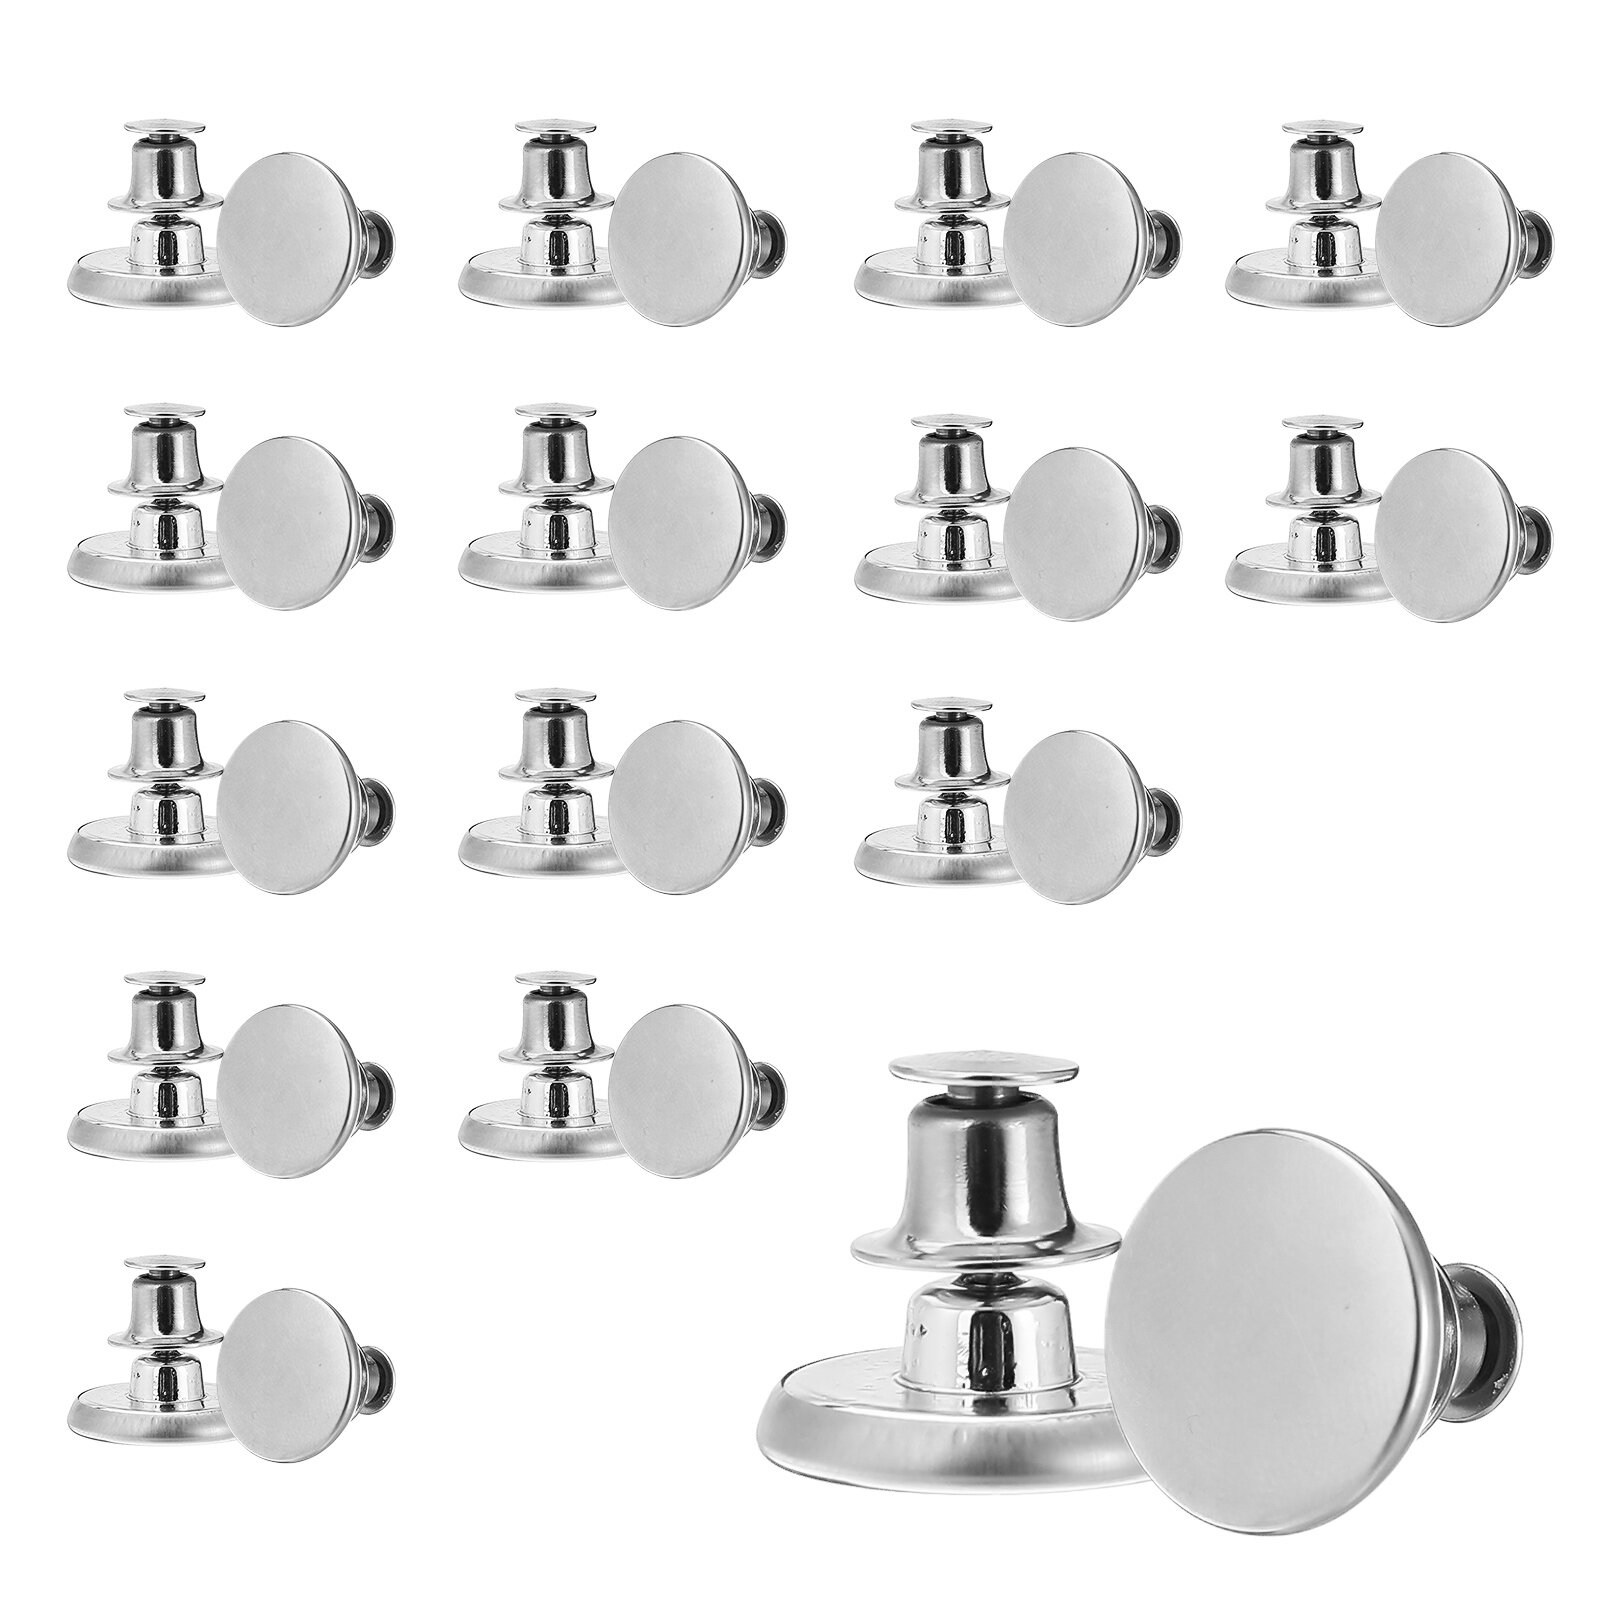 32pcs Adjustable Detachable Jeans Pin Buttons Nail Sewing-free Retro Metal Buckles for DIY Clothing 